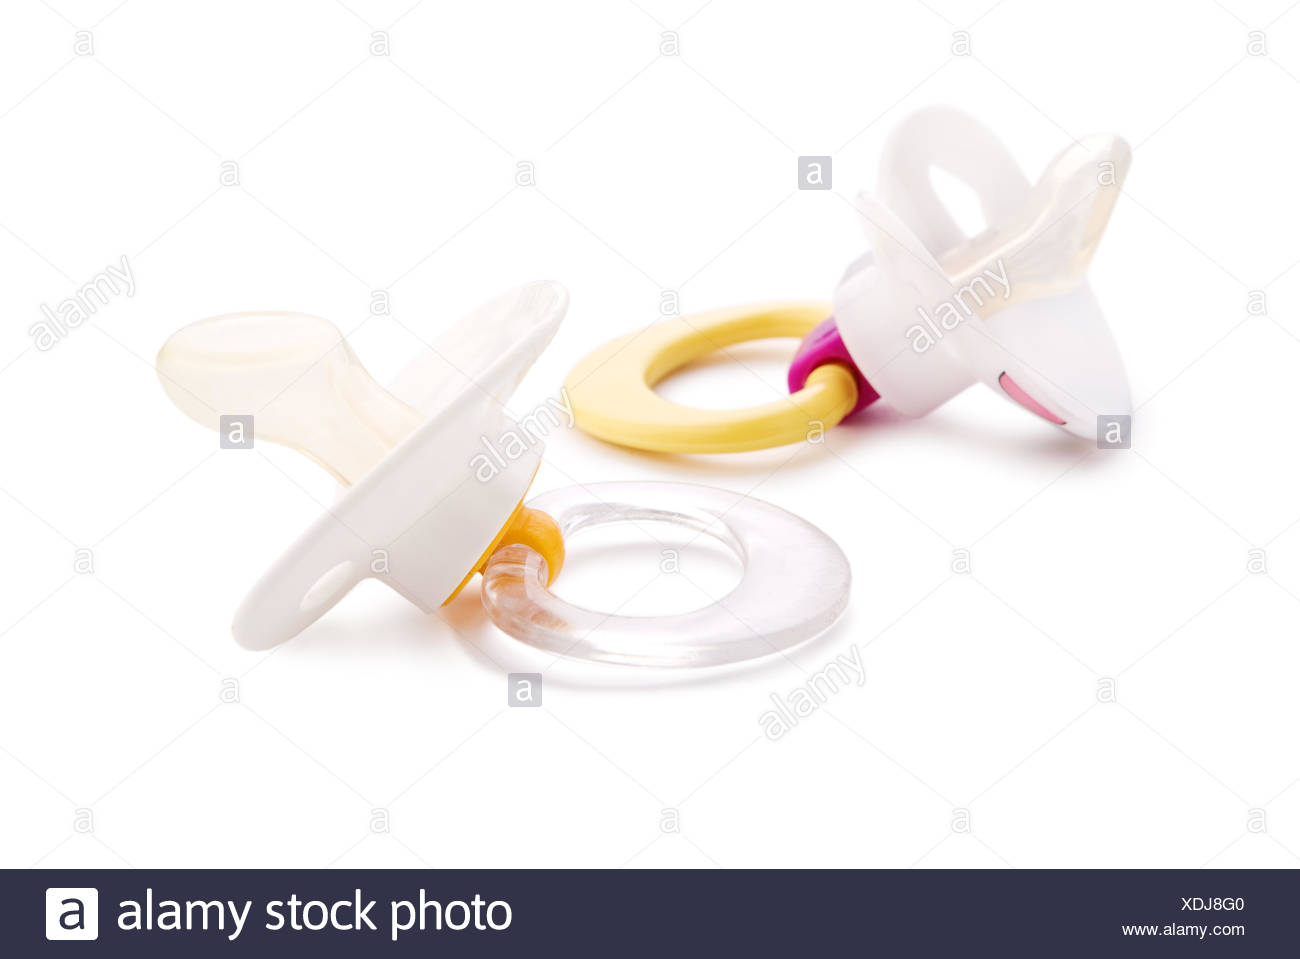 Baby Dummies High Resolution Stock Photography and Images - Alamy